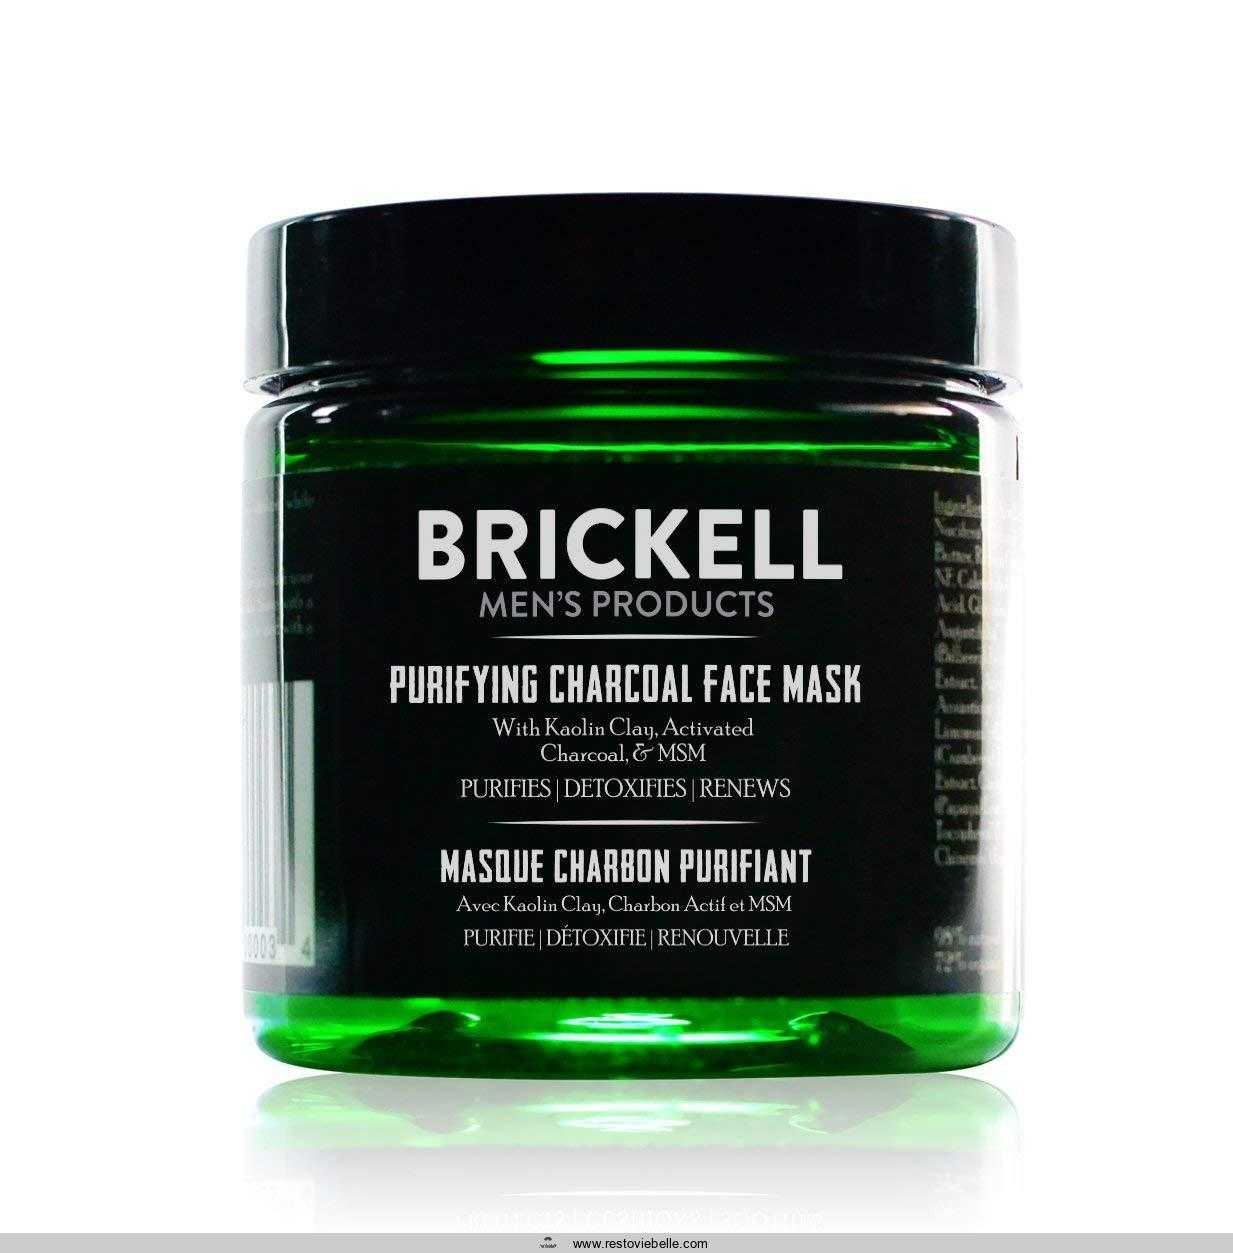 Brickell Men's Purifying Charcoal Face